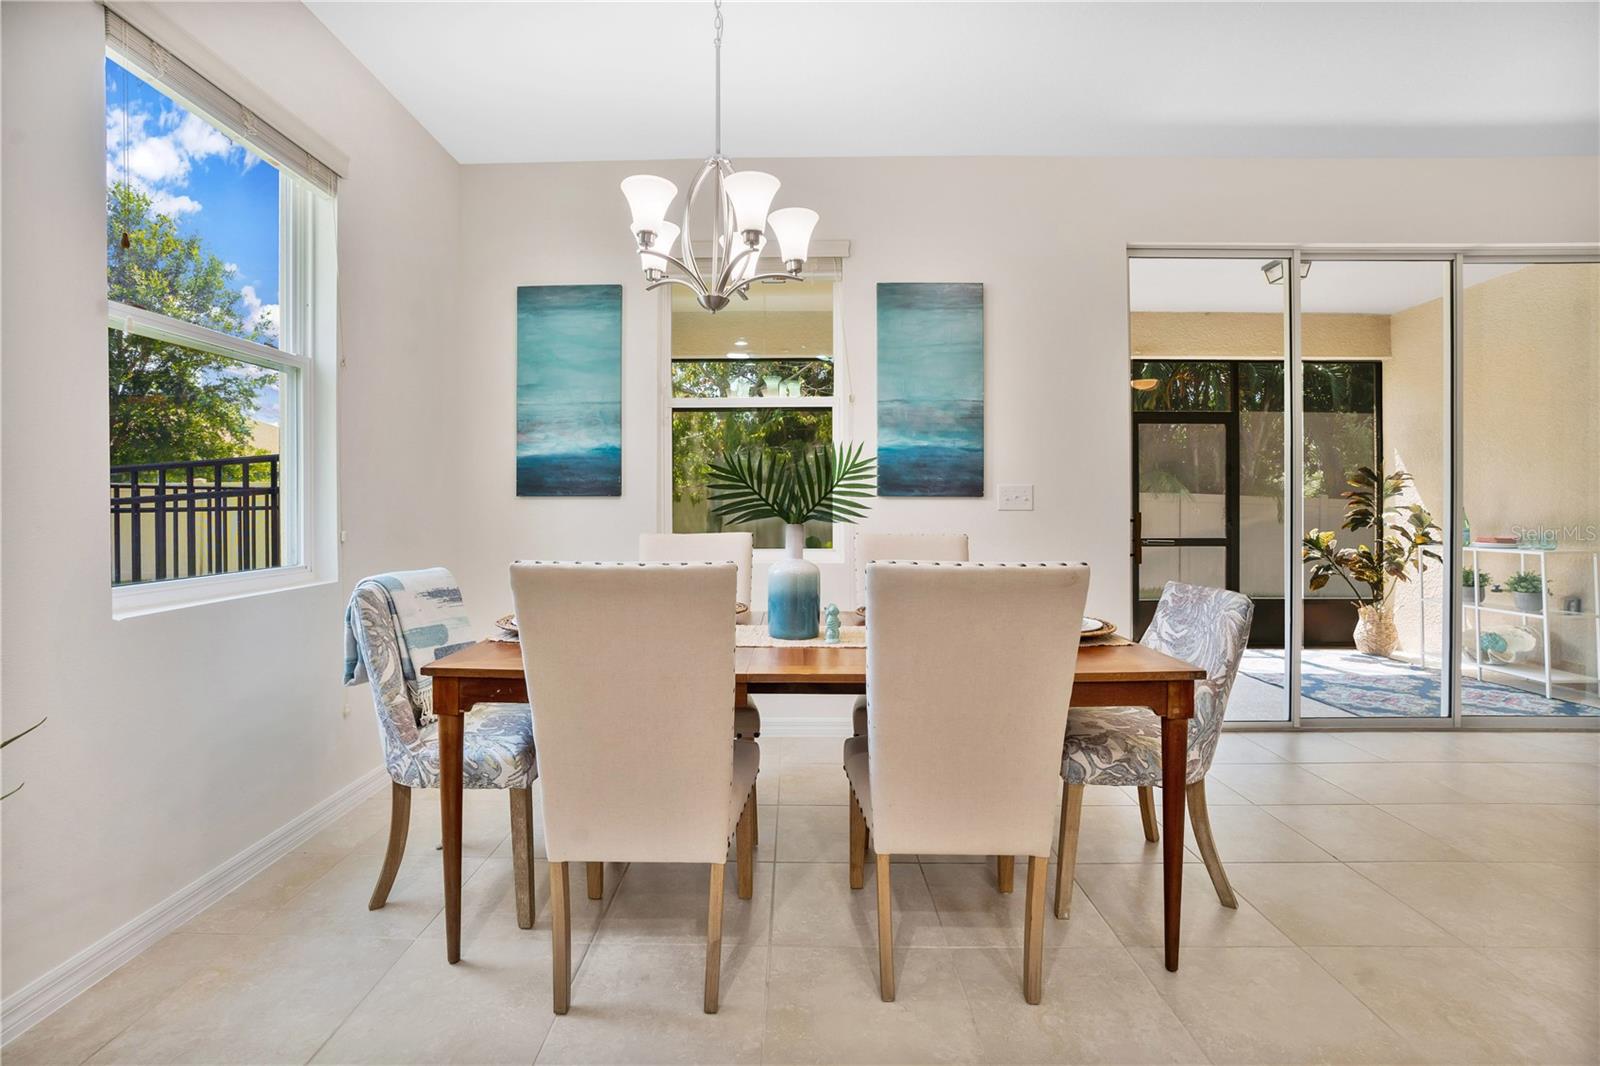 Spacious Dining Area with easy access to the lanai for indoor/outdoor dining